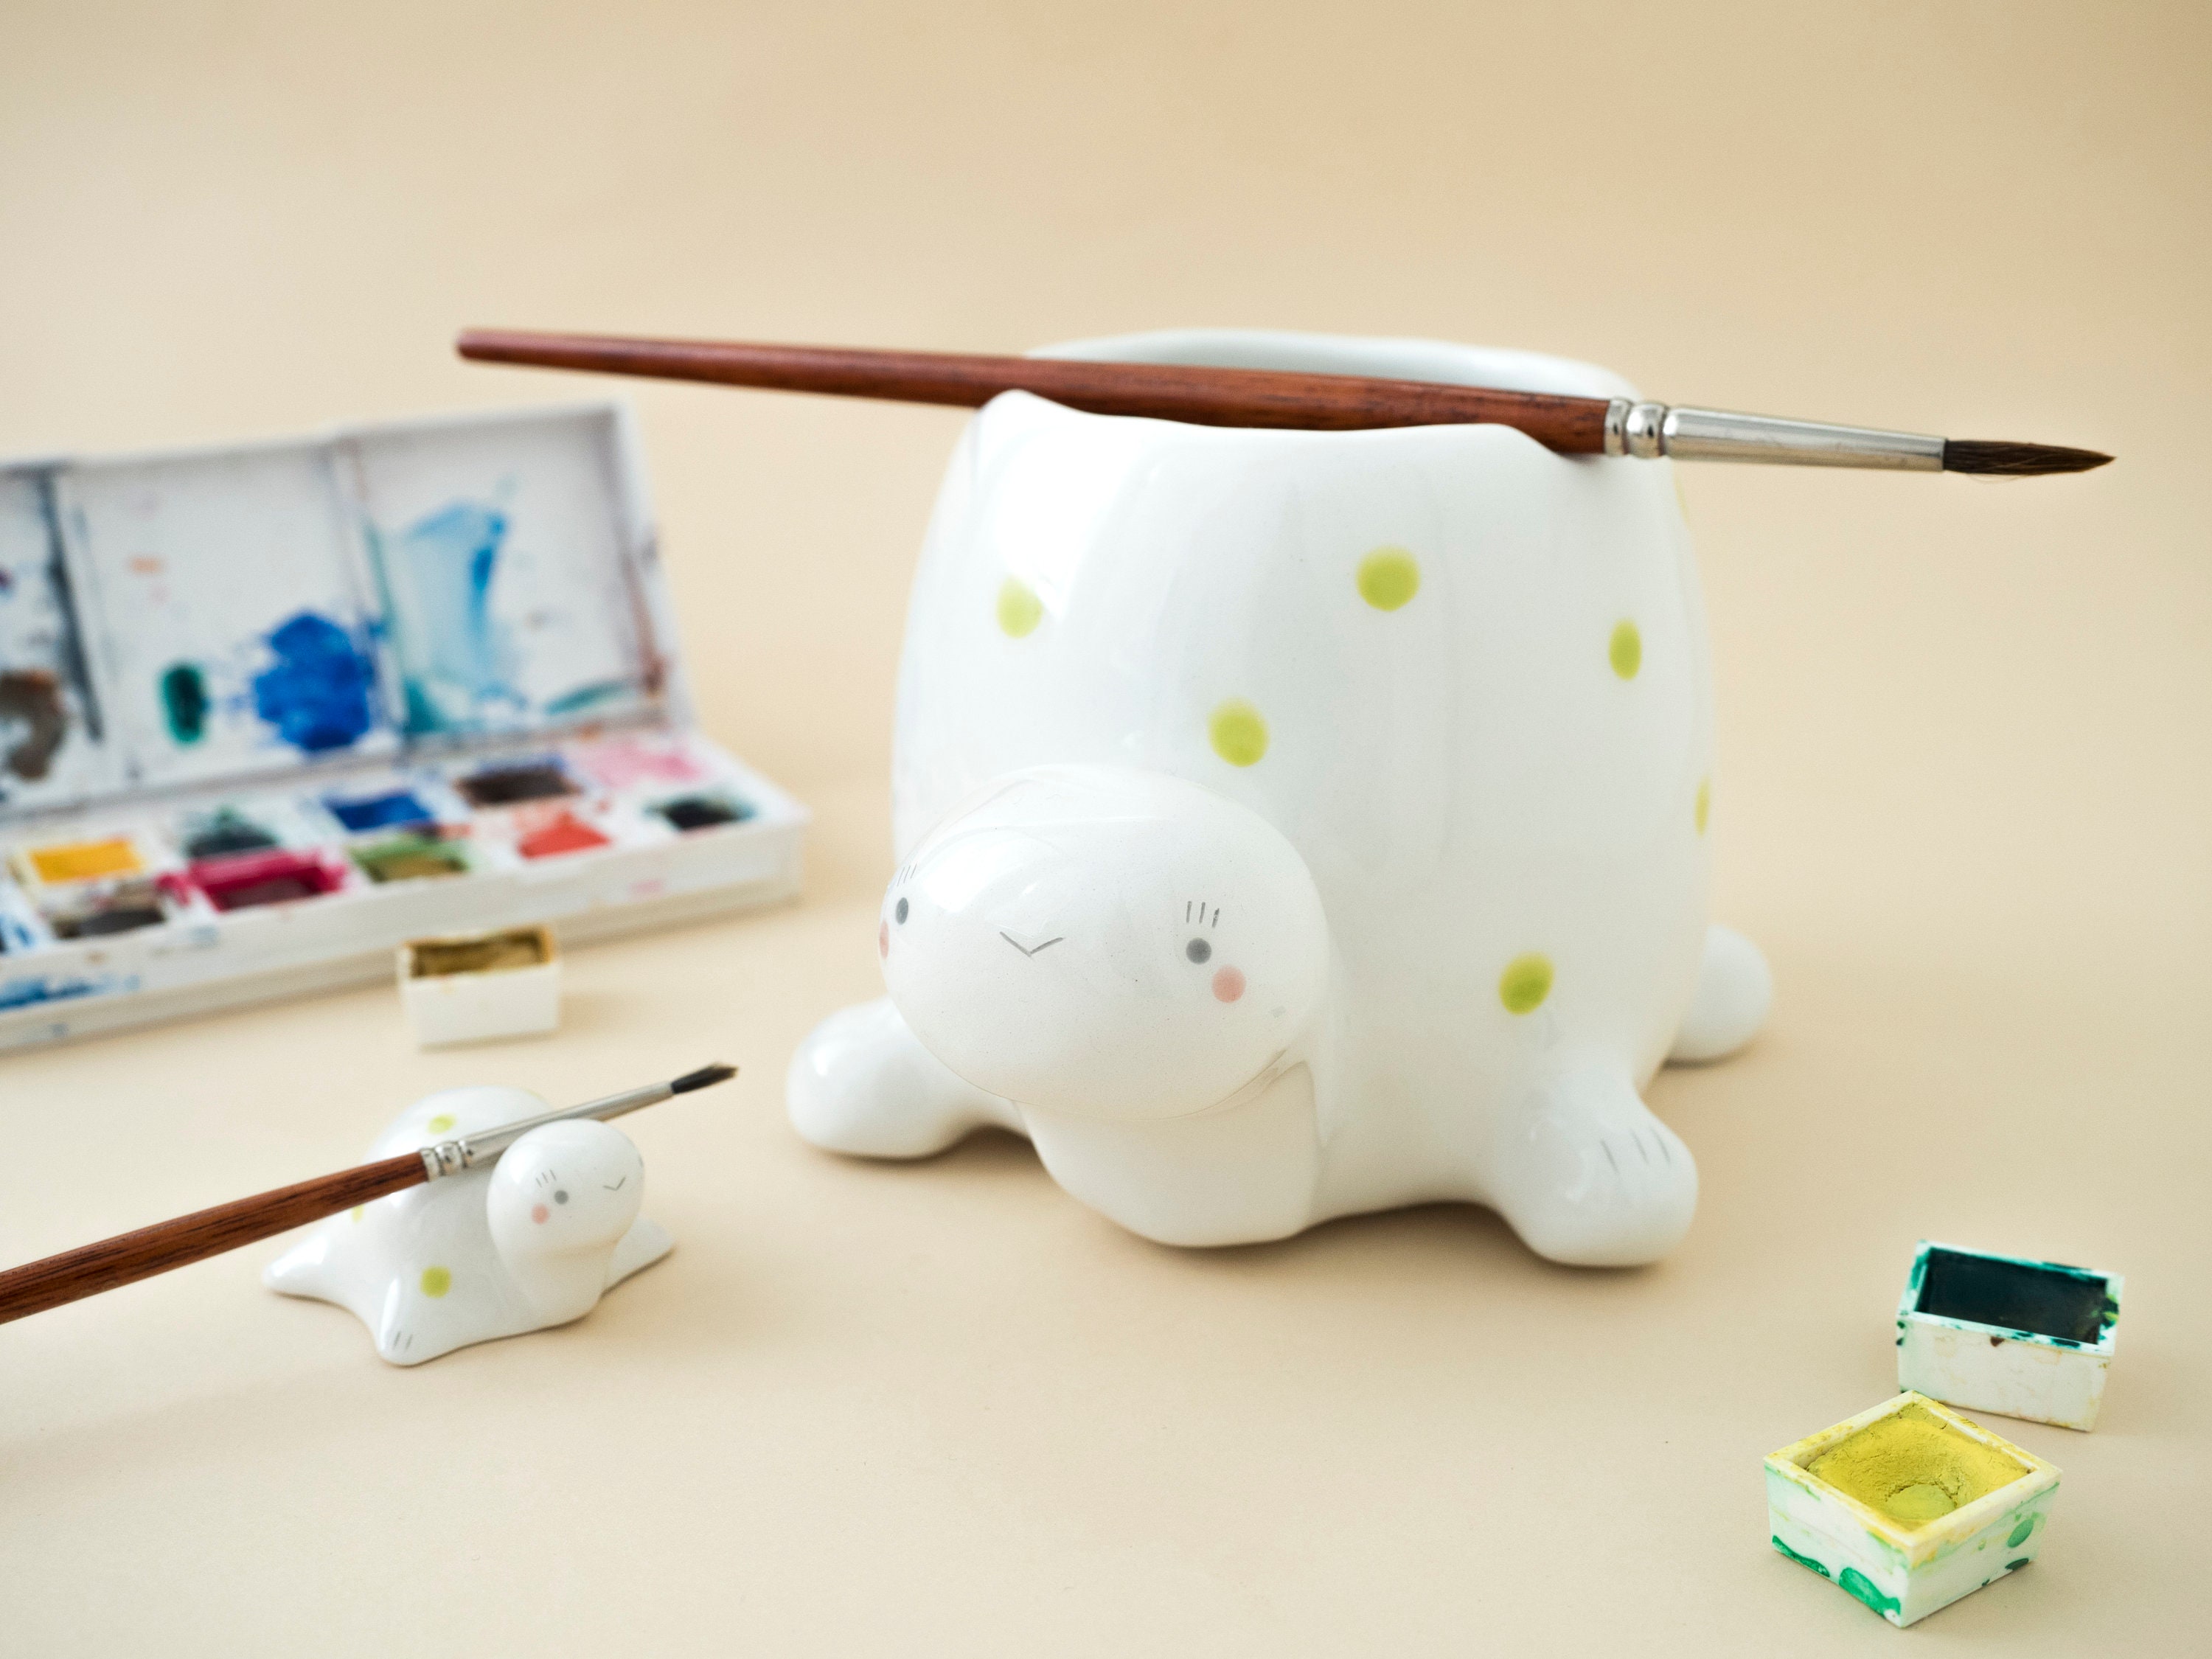 Paint Brush Rest for Artists, Painters and Hobbyists With Ladybug